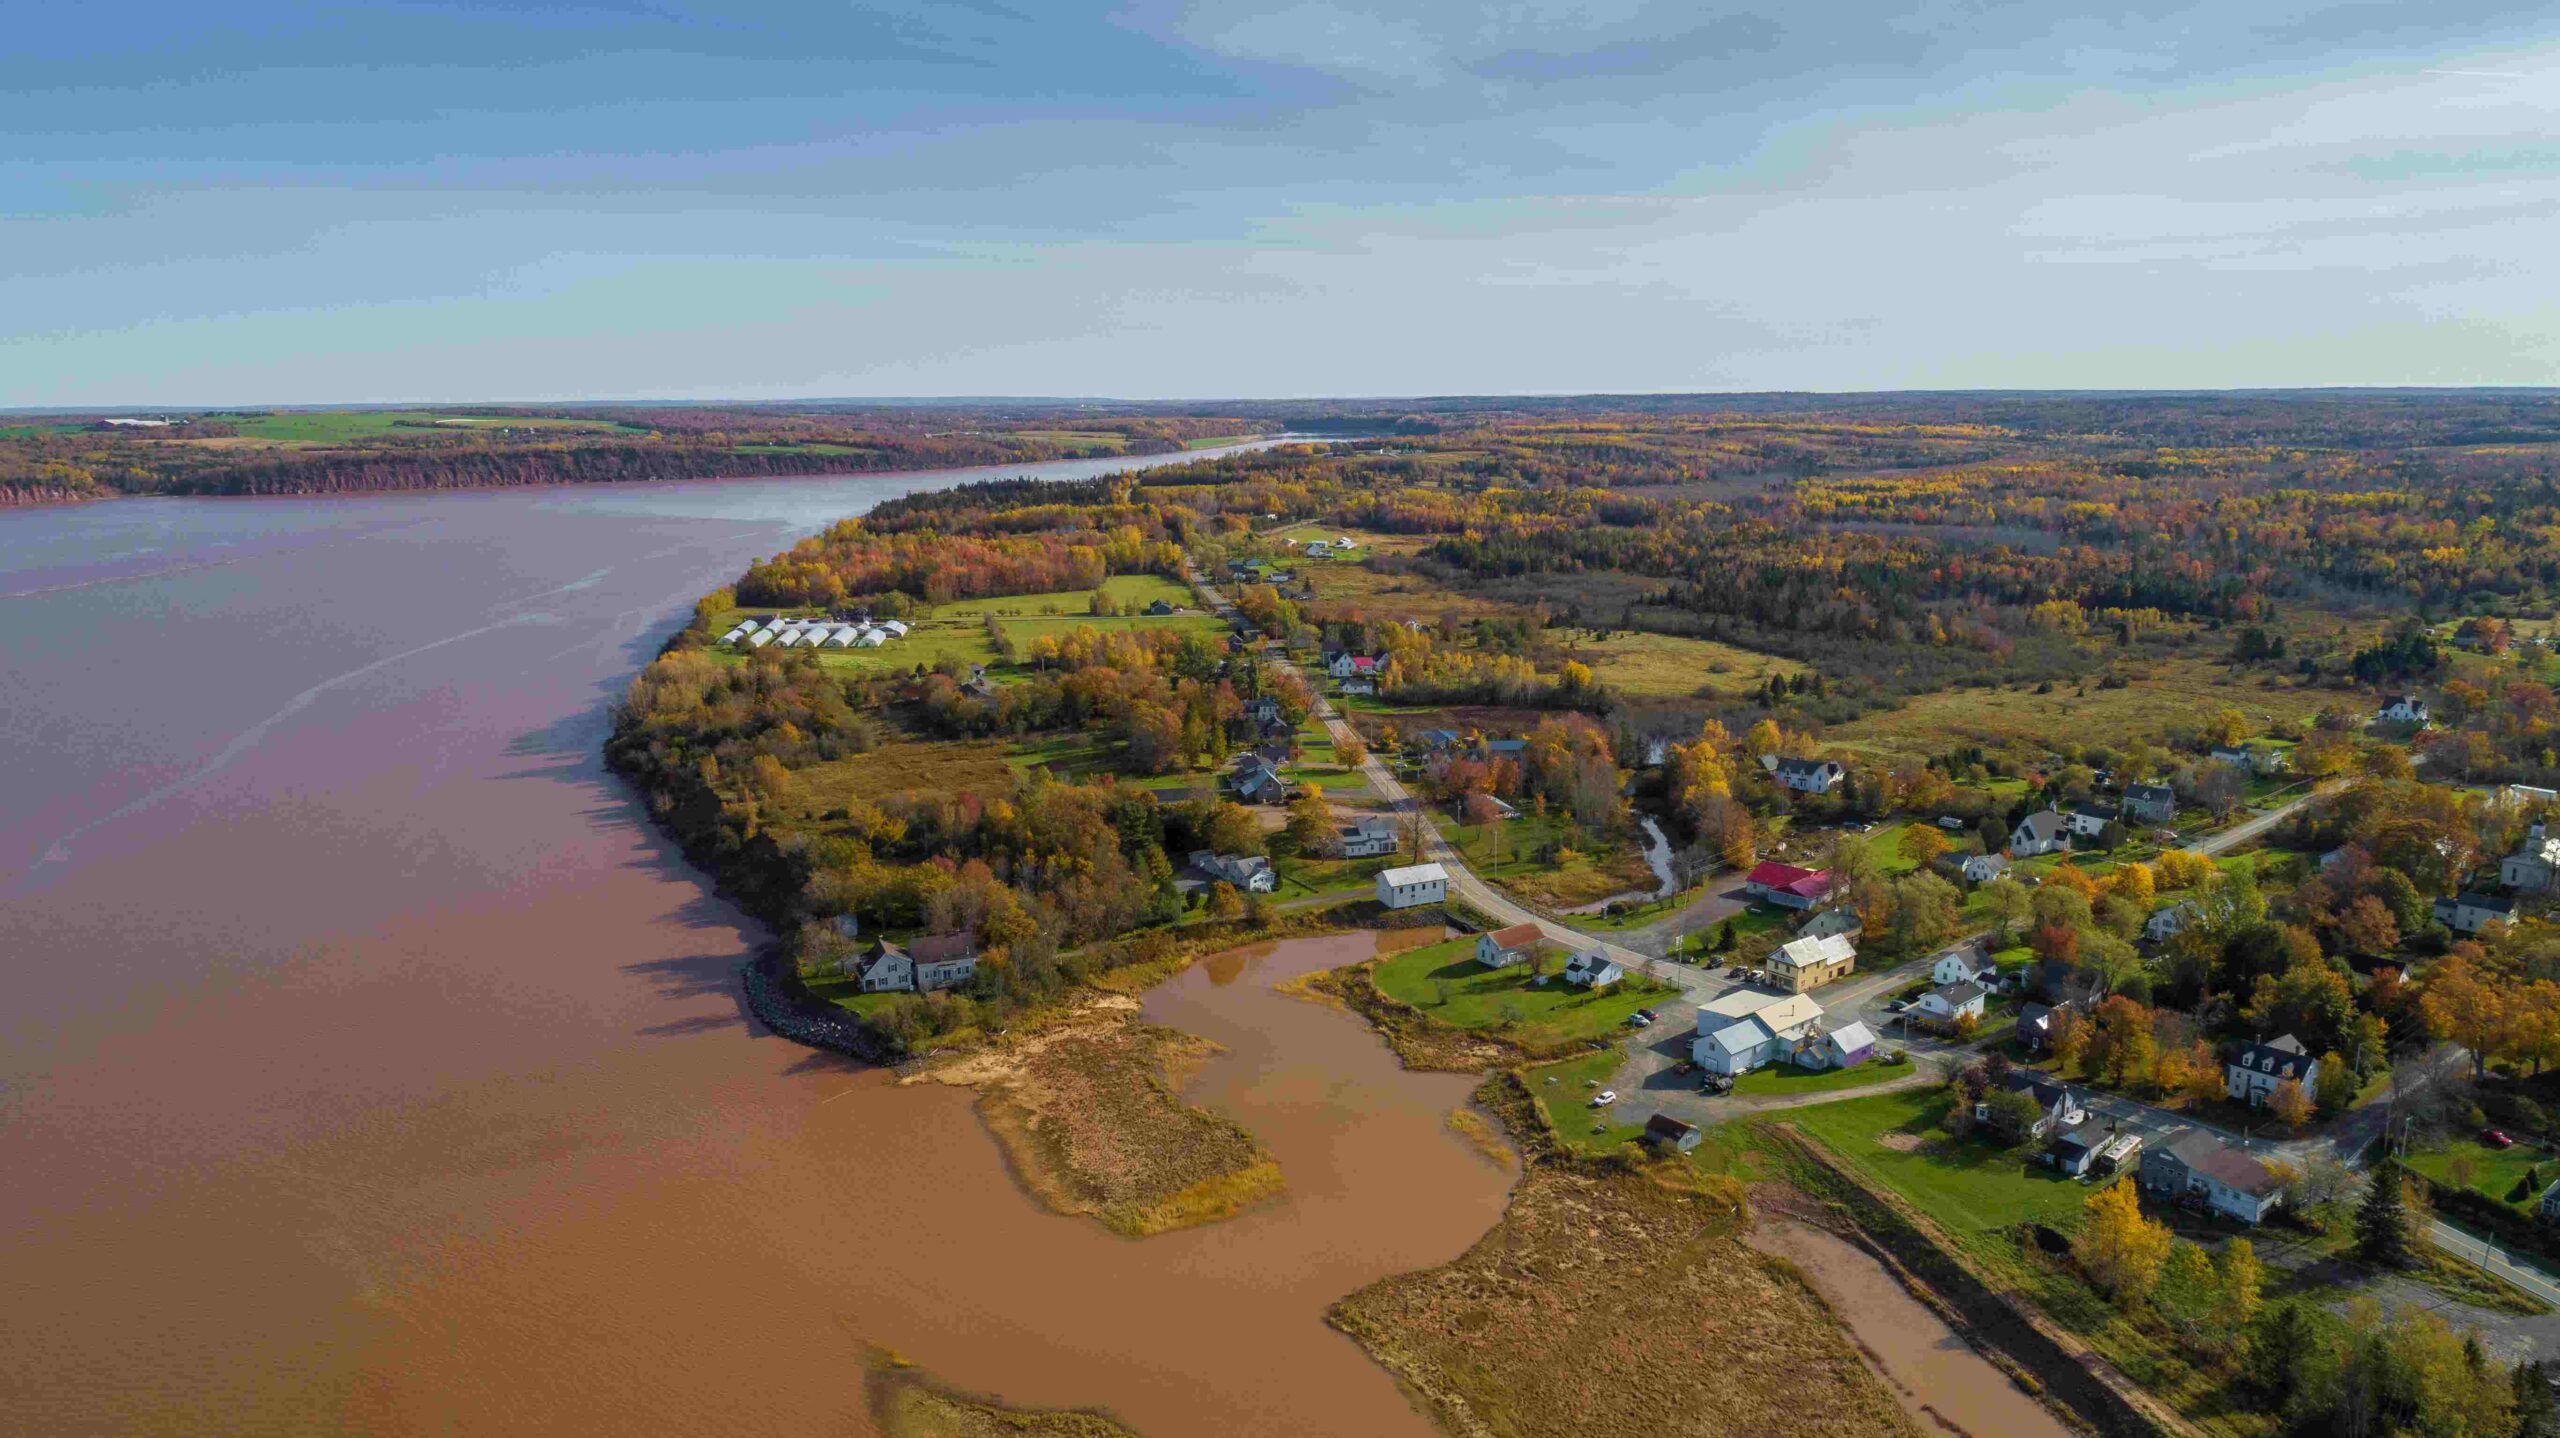 Aerial view of the village of Maitland featuring the Shubenacadie River